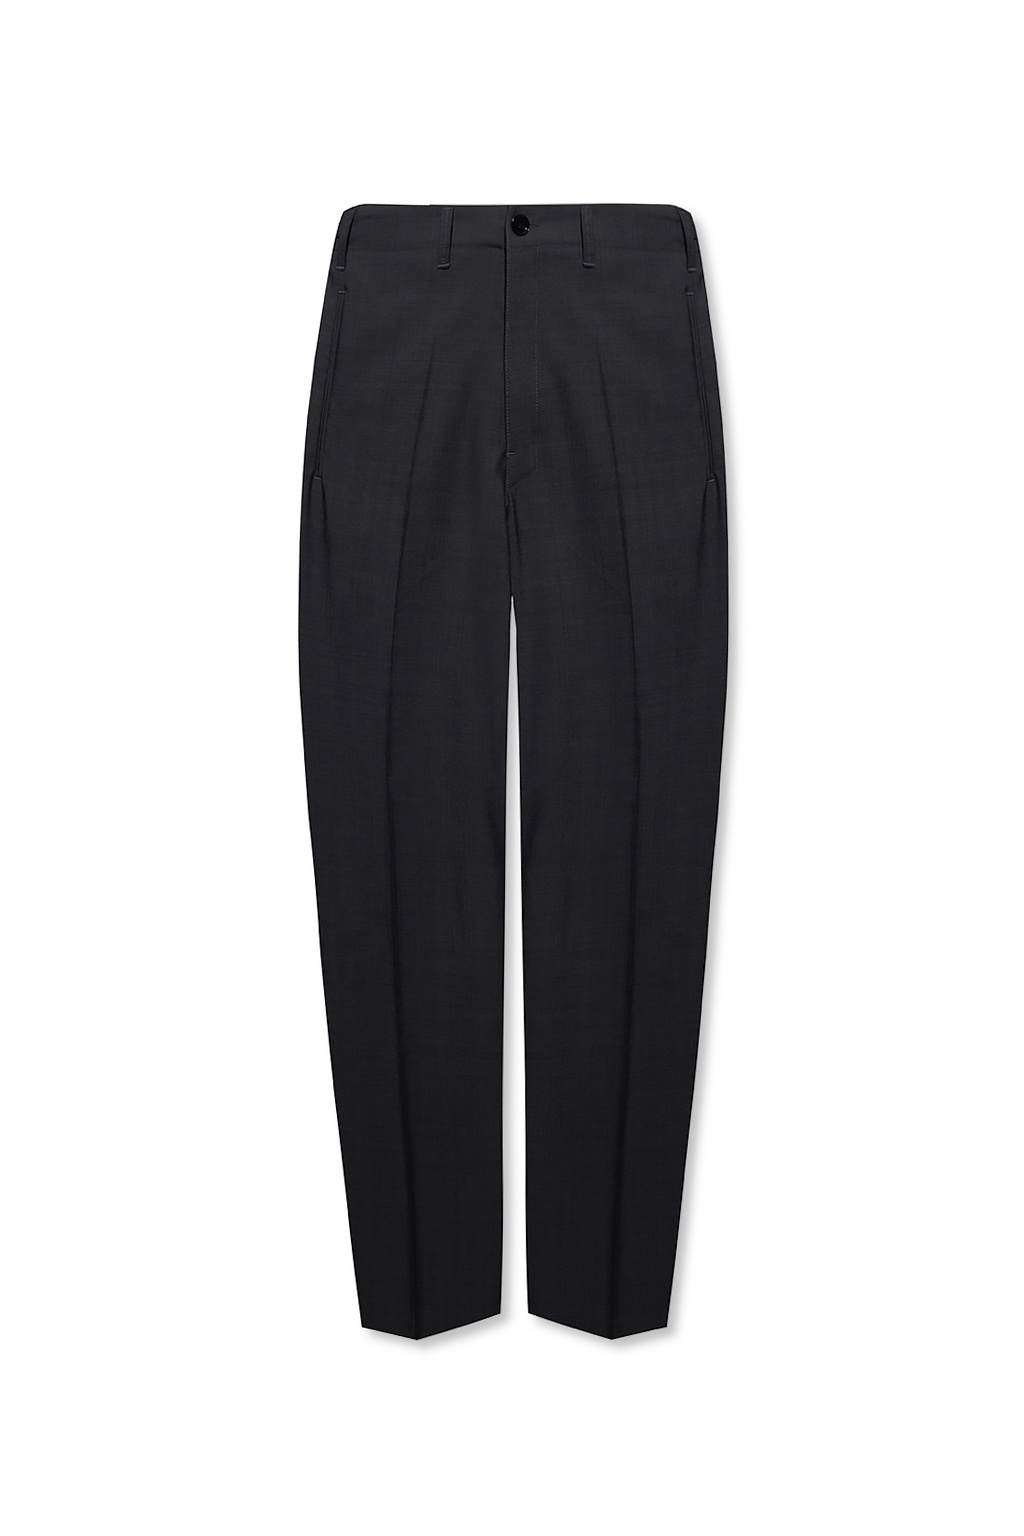 IetpShops Netherlands - Pleat - front perfeito trousers Lemaire